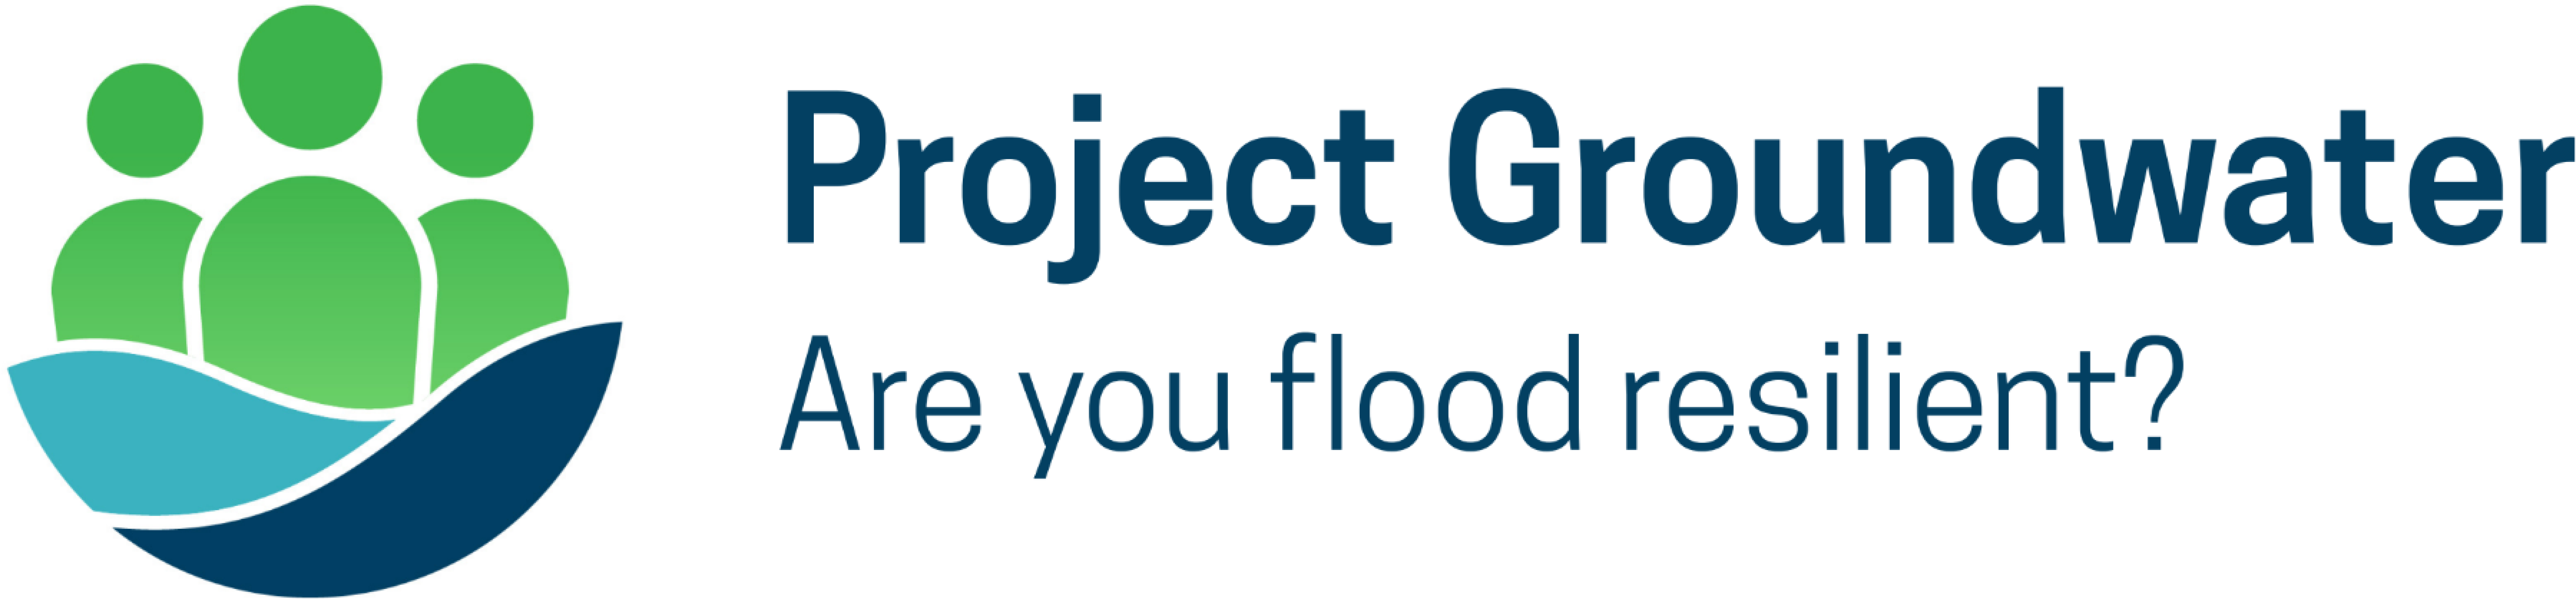 Project Groundwater logo